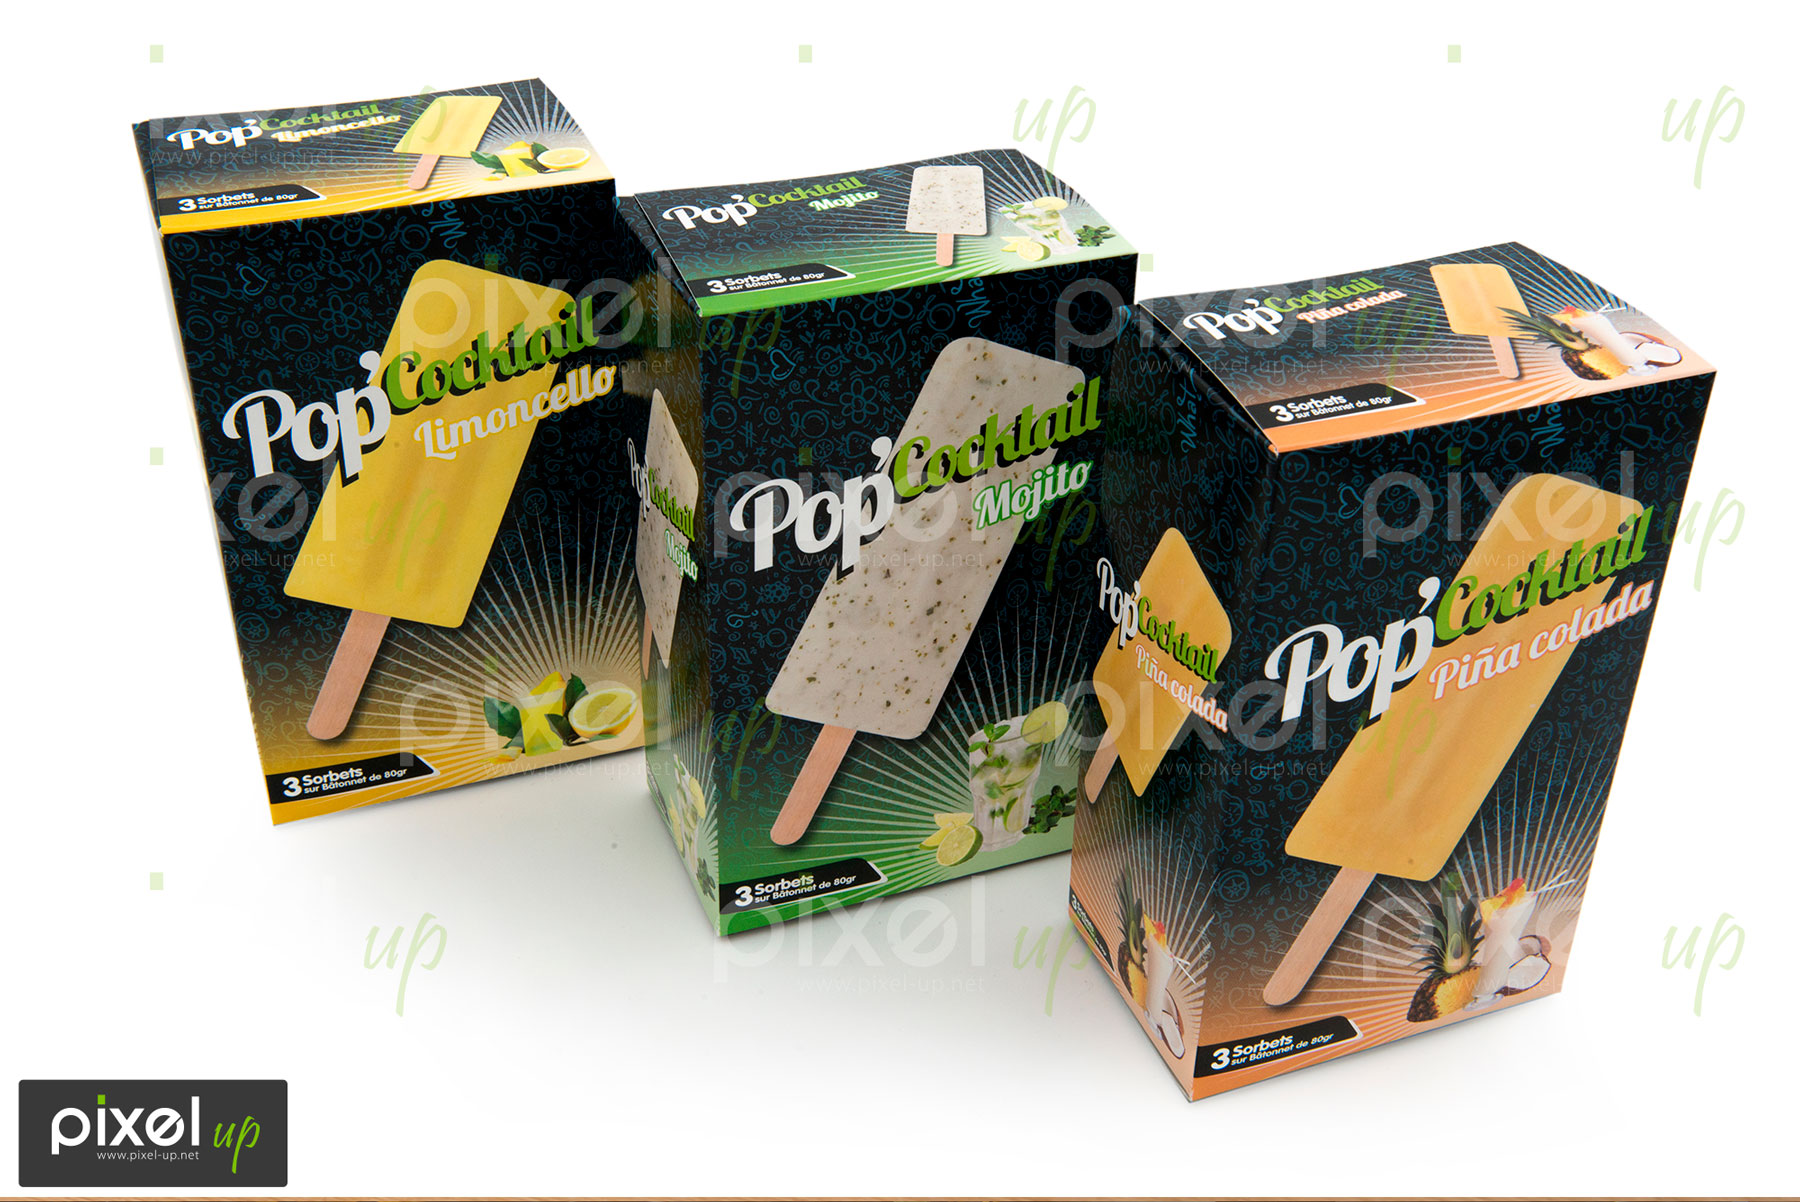 Photographe Pixel up - Création Packaging PopCocktail